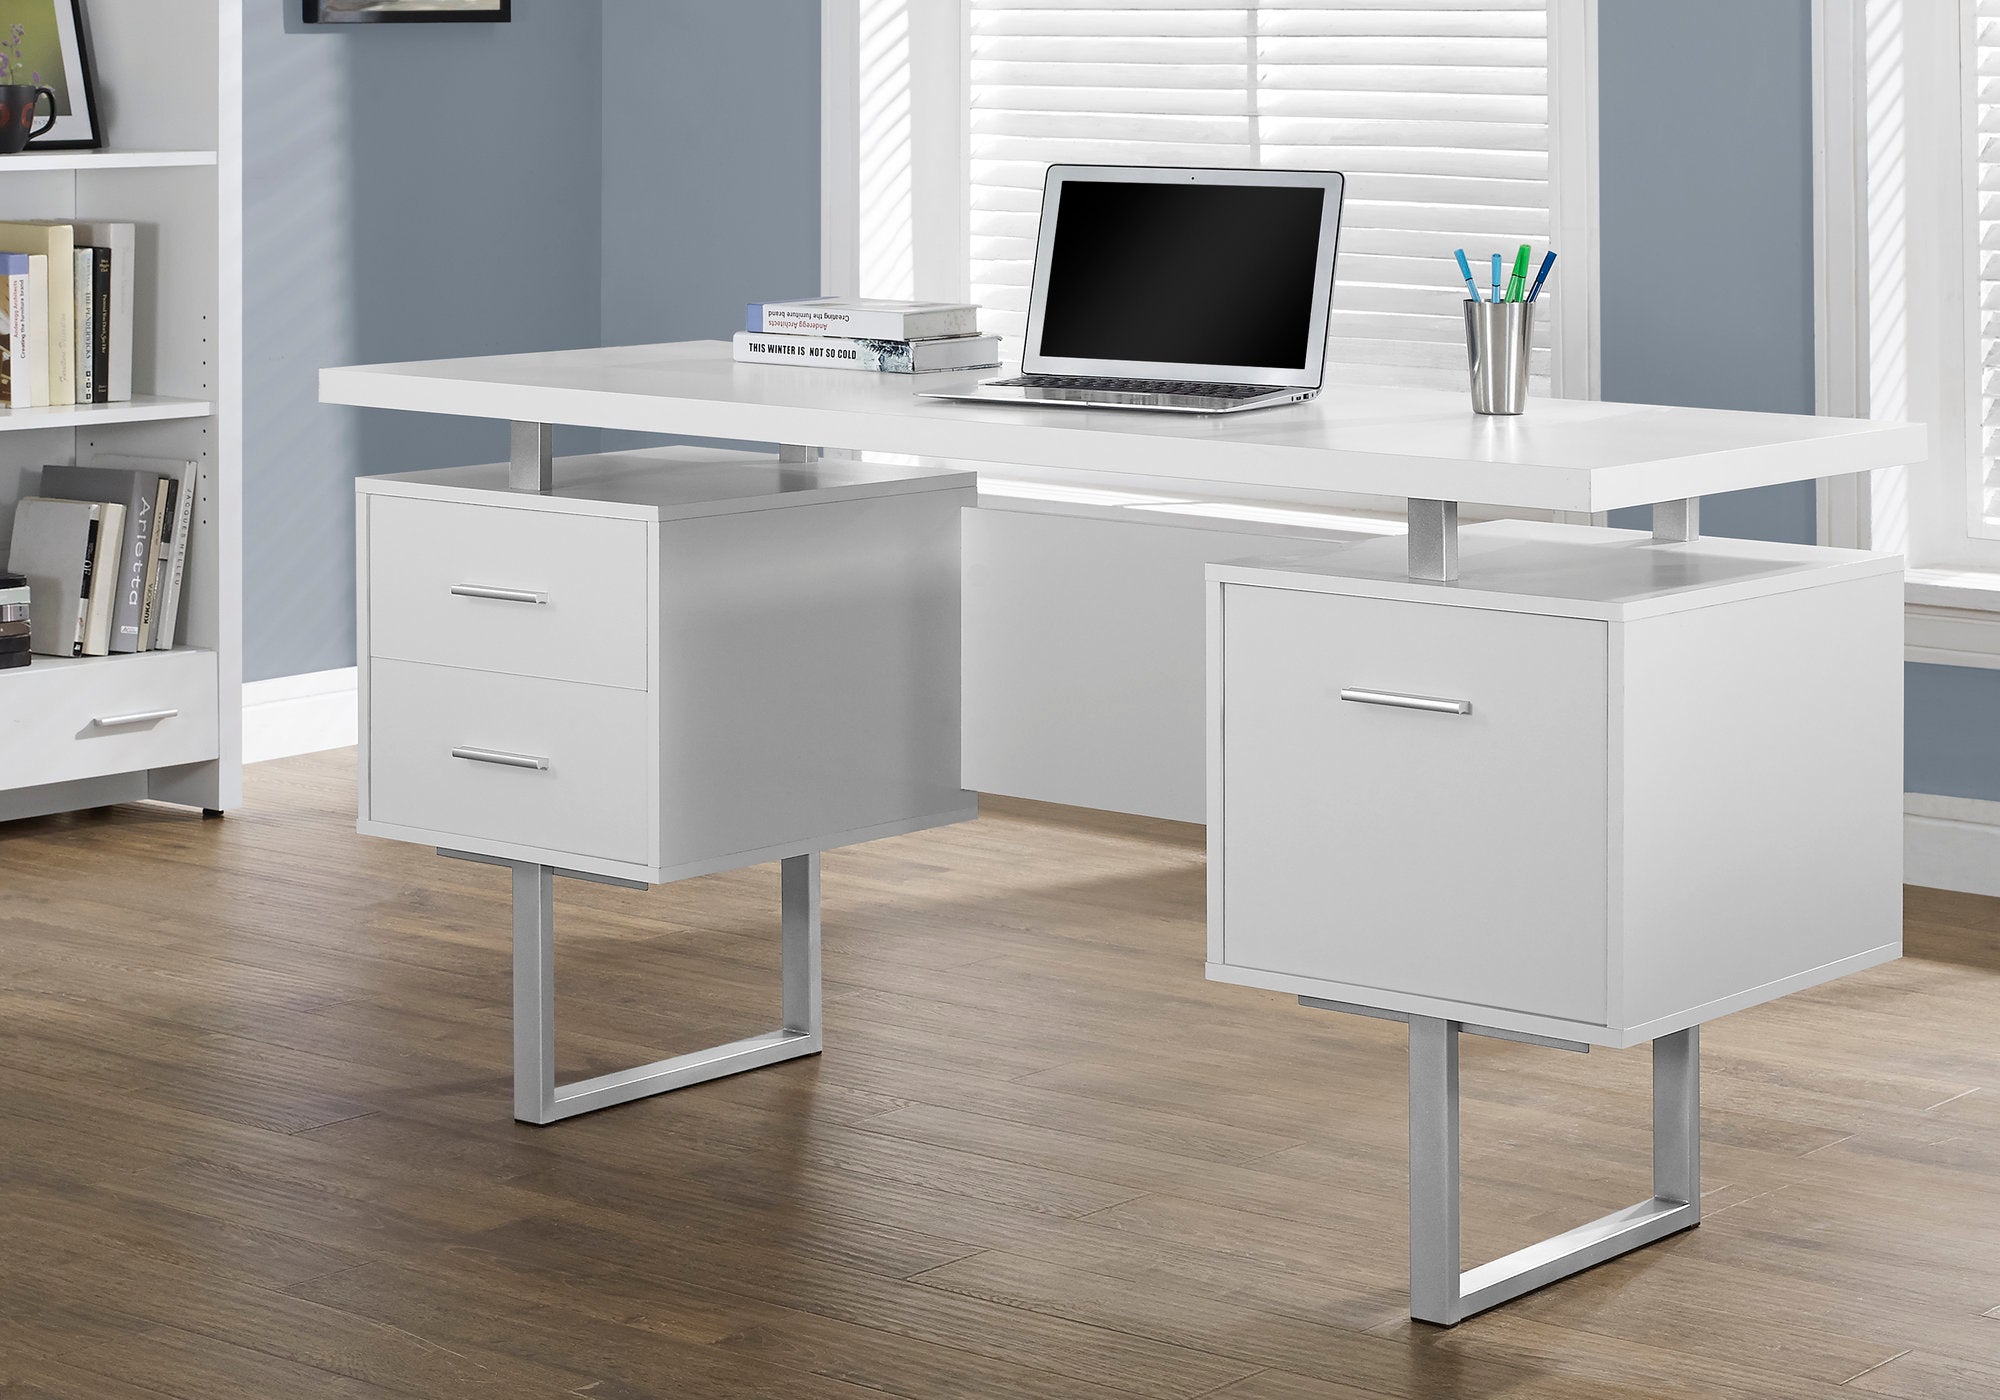 MN-947081    Computer Desk, Home Office, Laptop, Left, Right Set-Up, Storage Drawers, 60"L, Metal, Laminate, White, Grey, Contemporary, Modern